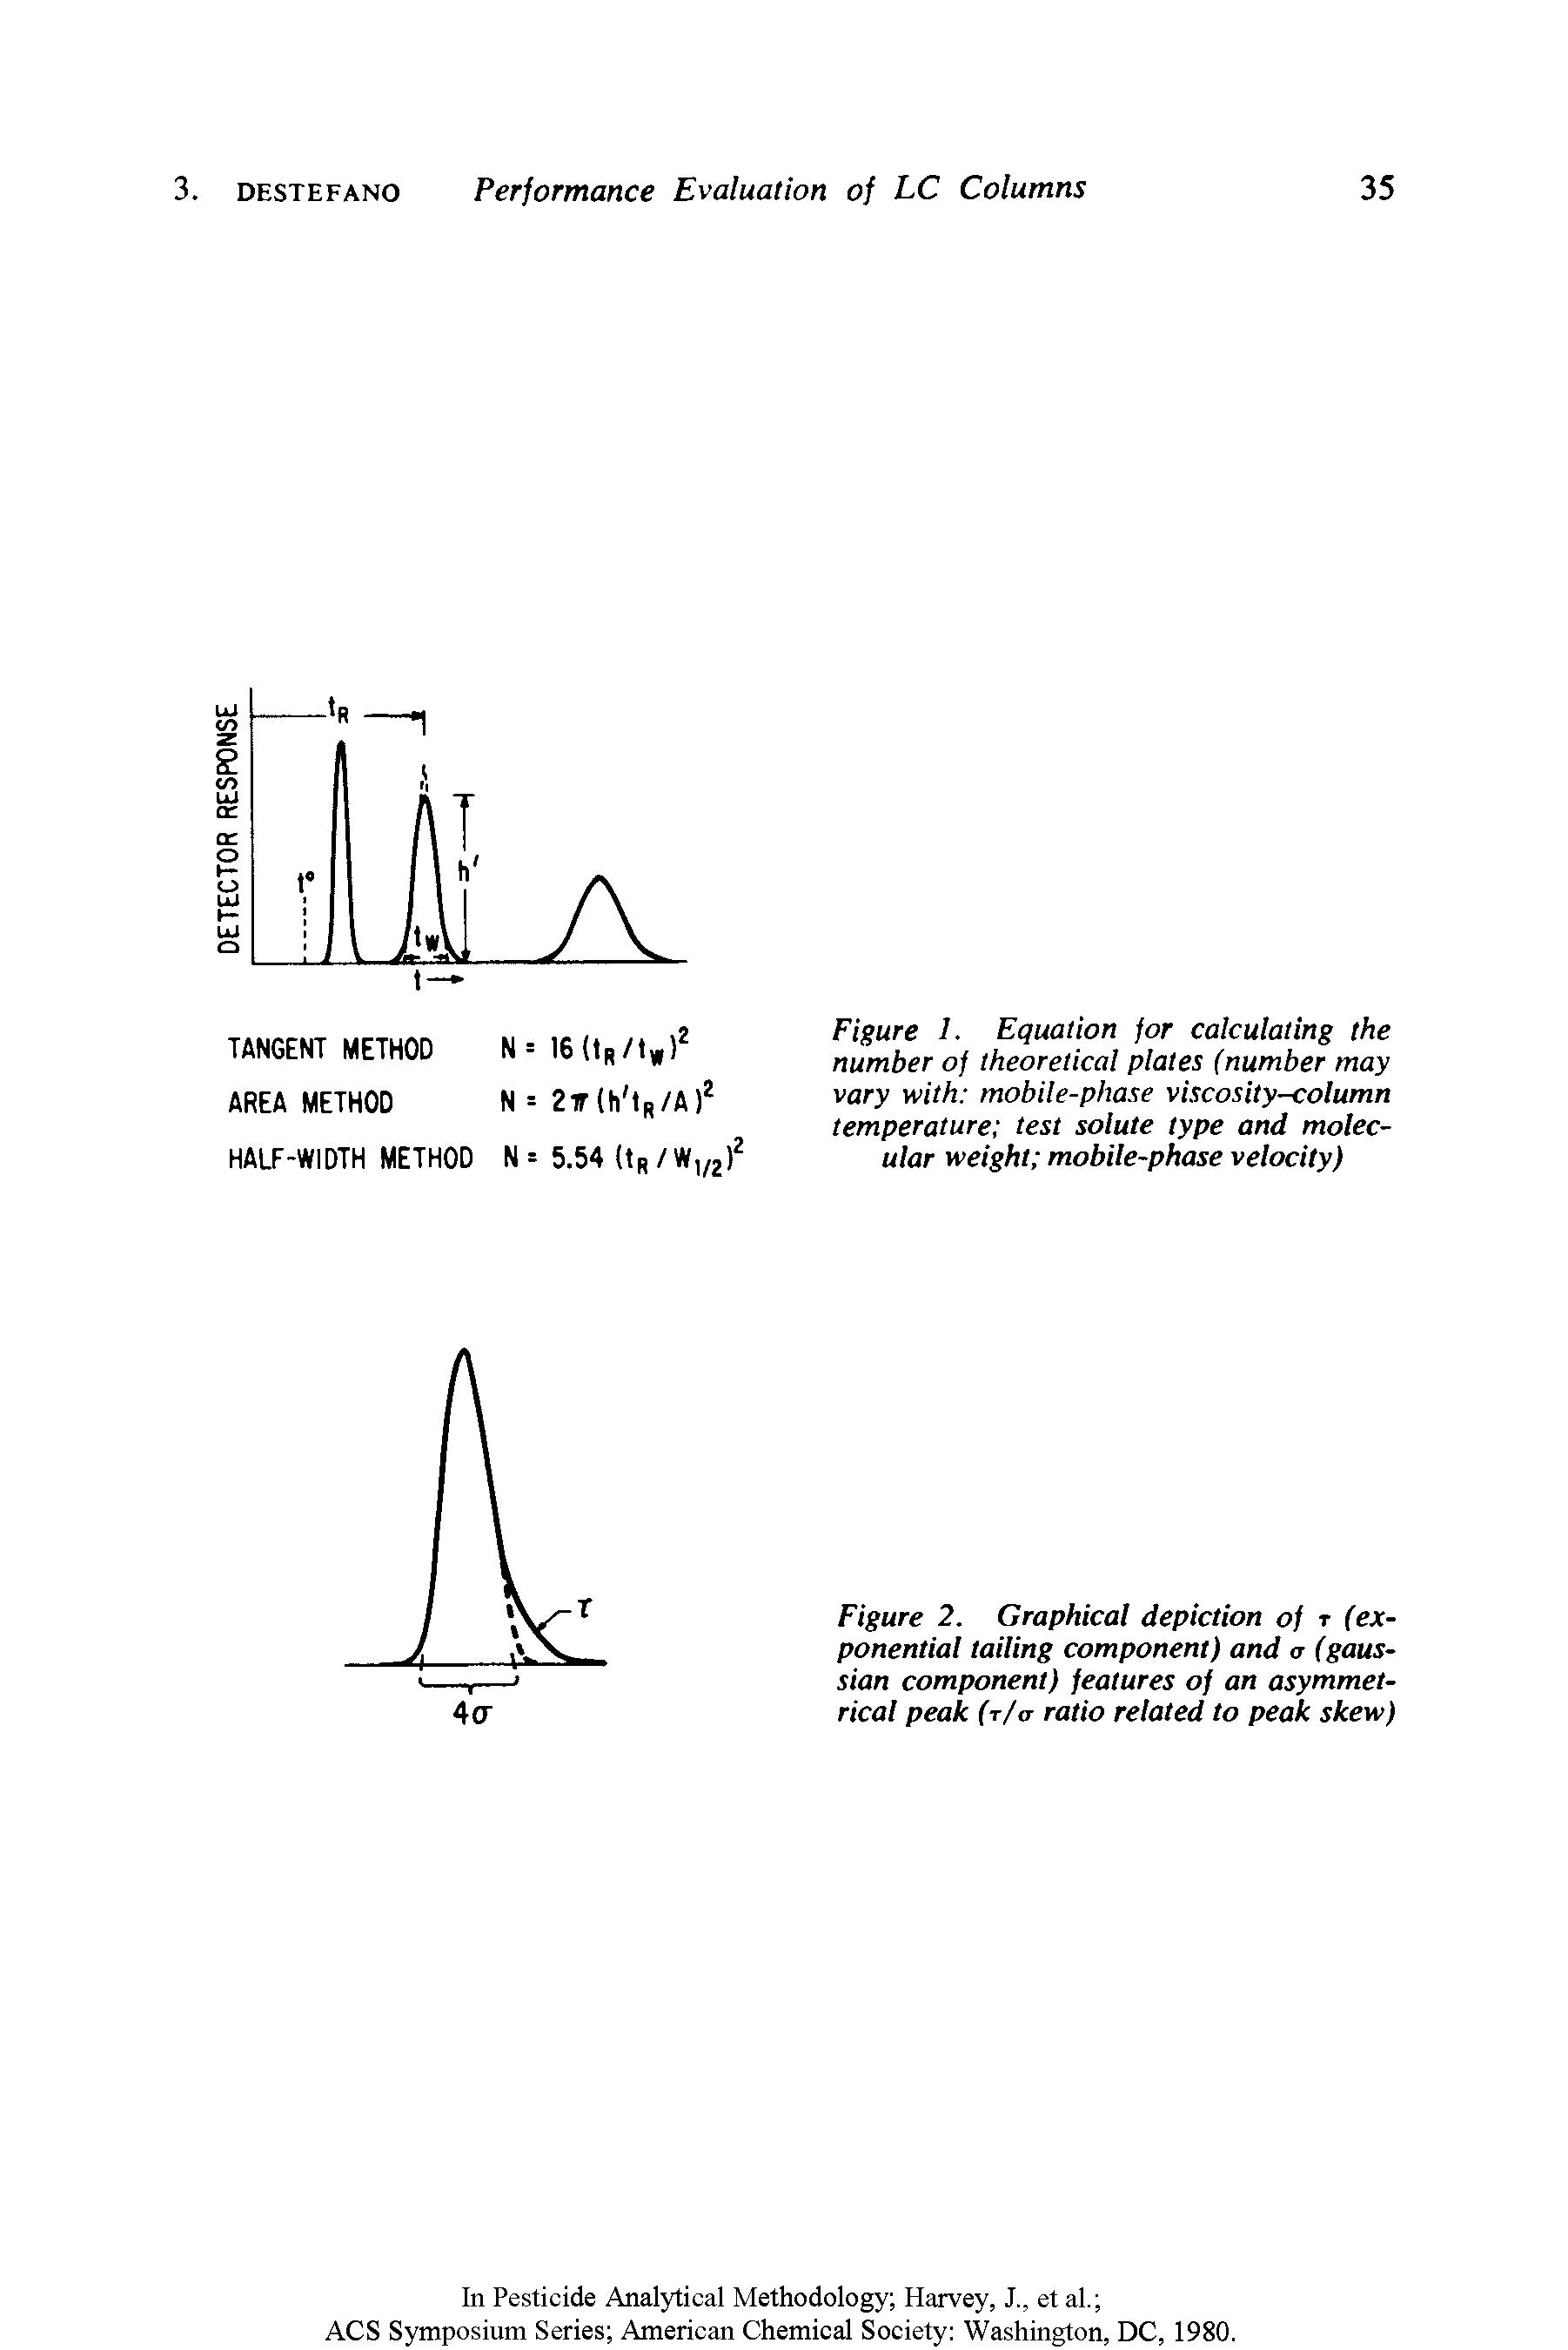 Figure 2. Graphical depiction of r (exponential tailing component) and a (gaus-sian component) features of an asymmetrical peak (t/a ratio related to peak skew)...